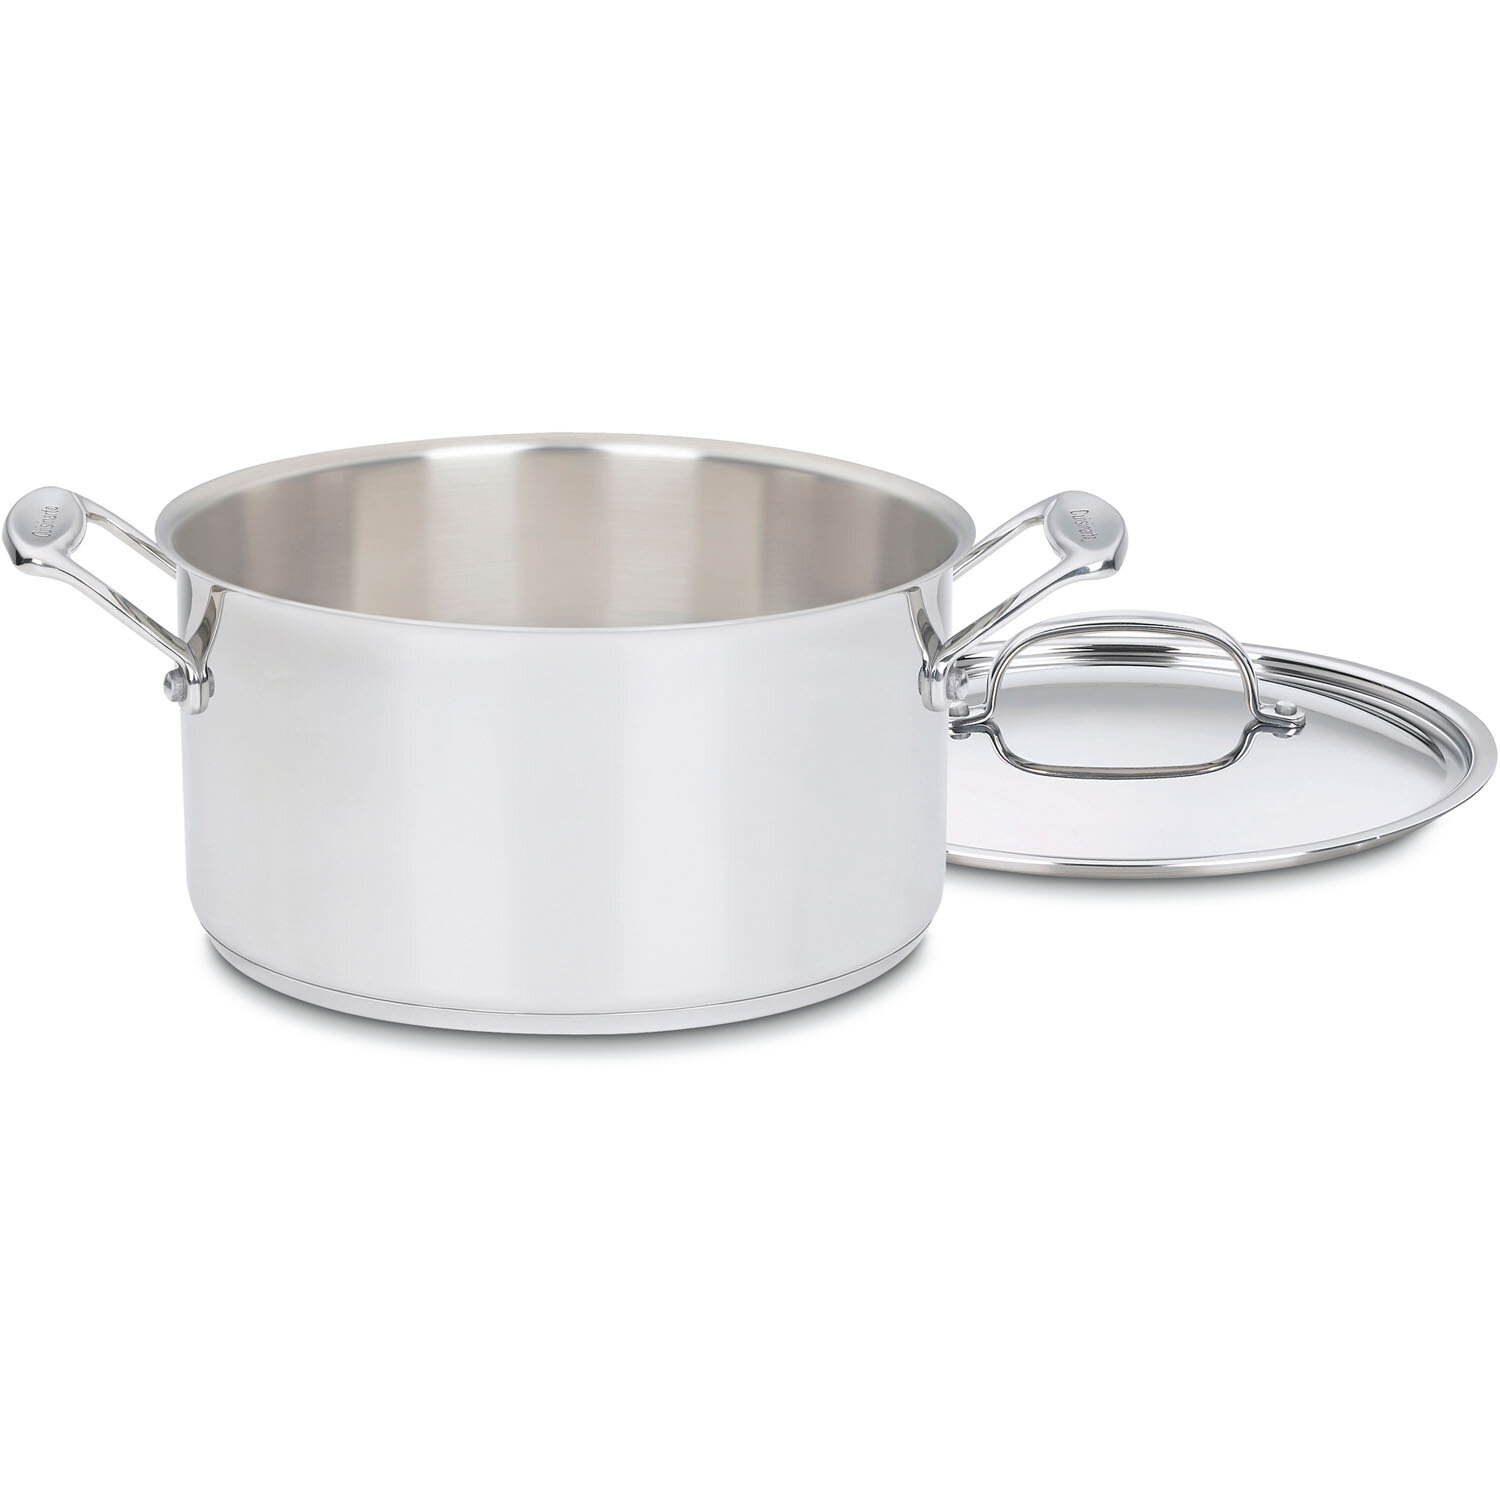 Cuisinart French Classic Tri-Ply Stainless 4.5 Quart Dutch Oven with Cover  